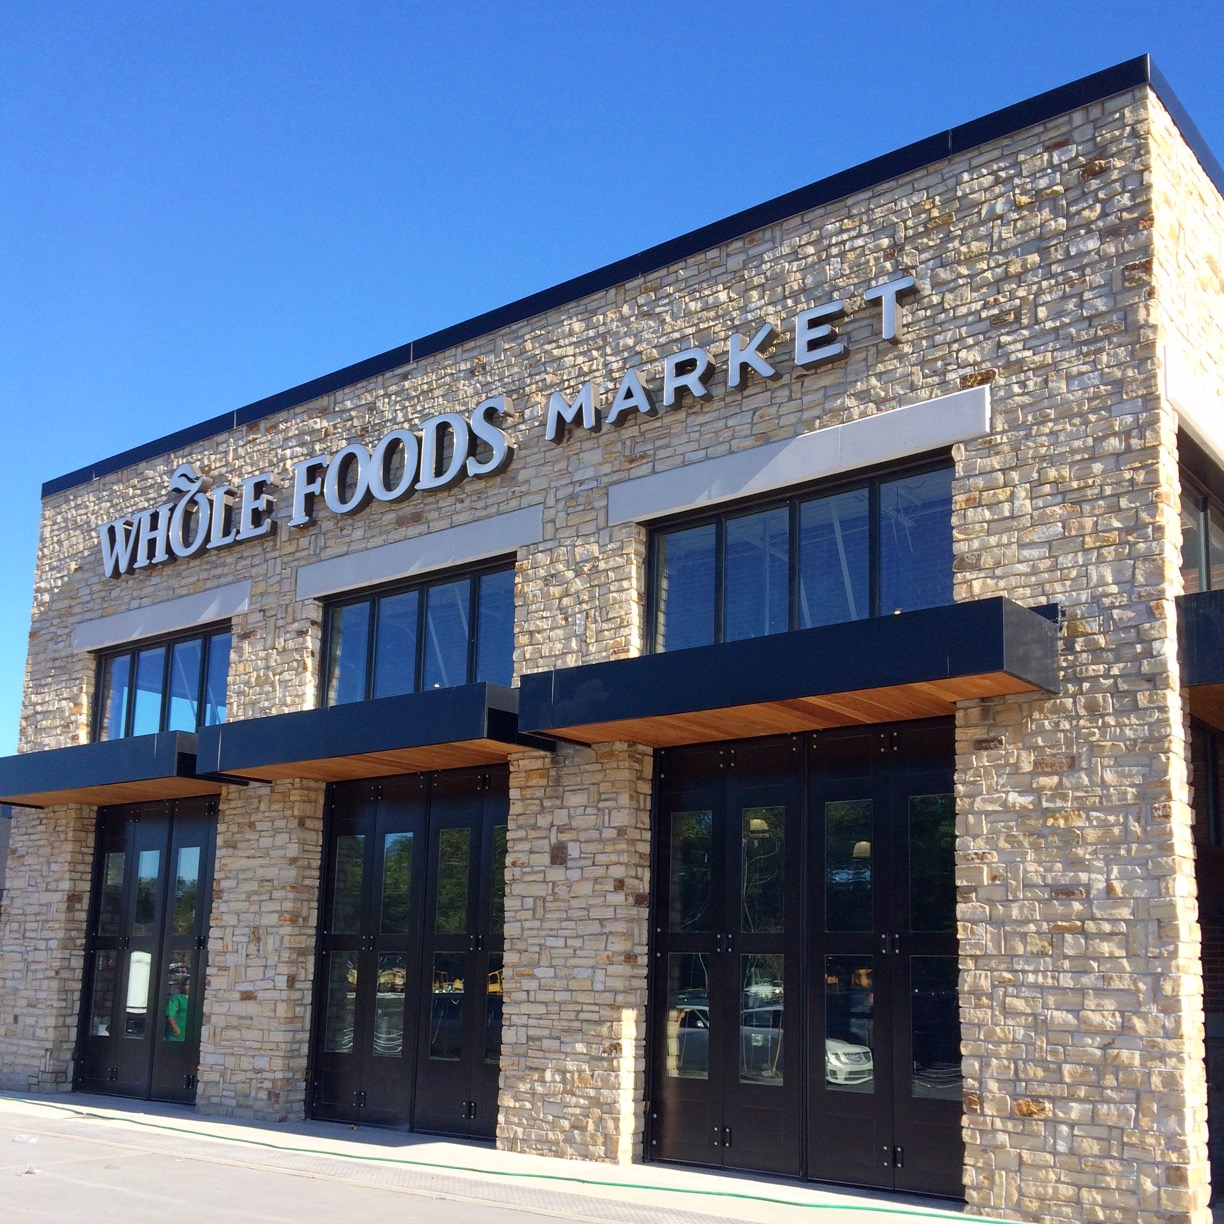 Whole Foods Market opens new store in Closter, New Jersey on October 19 